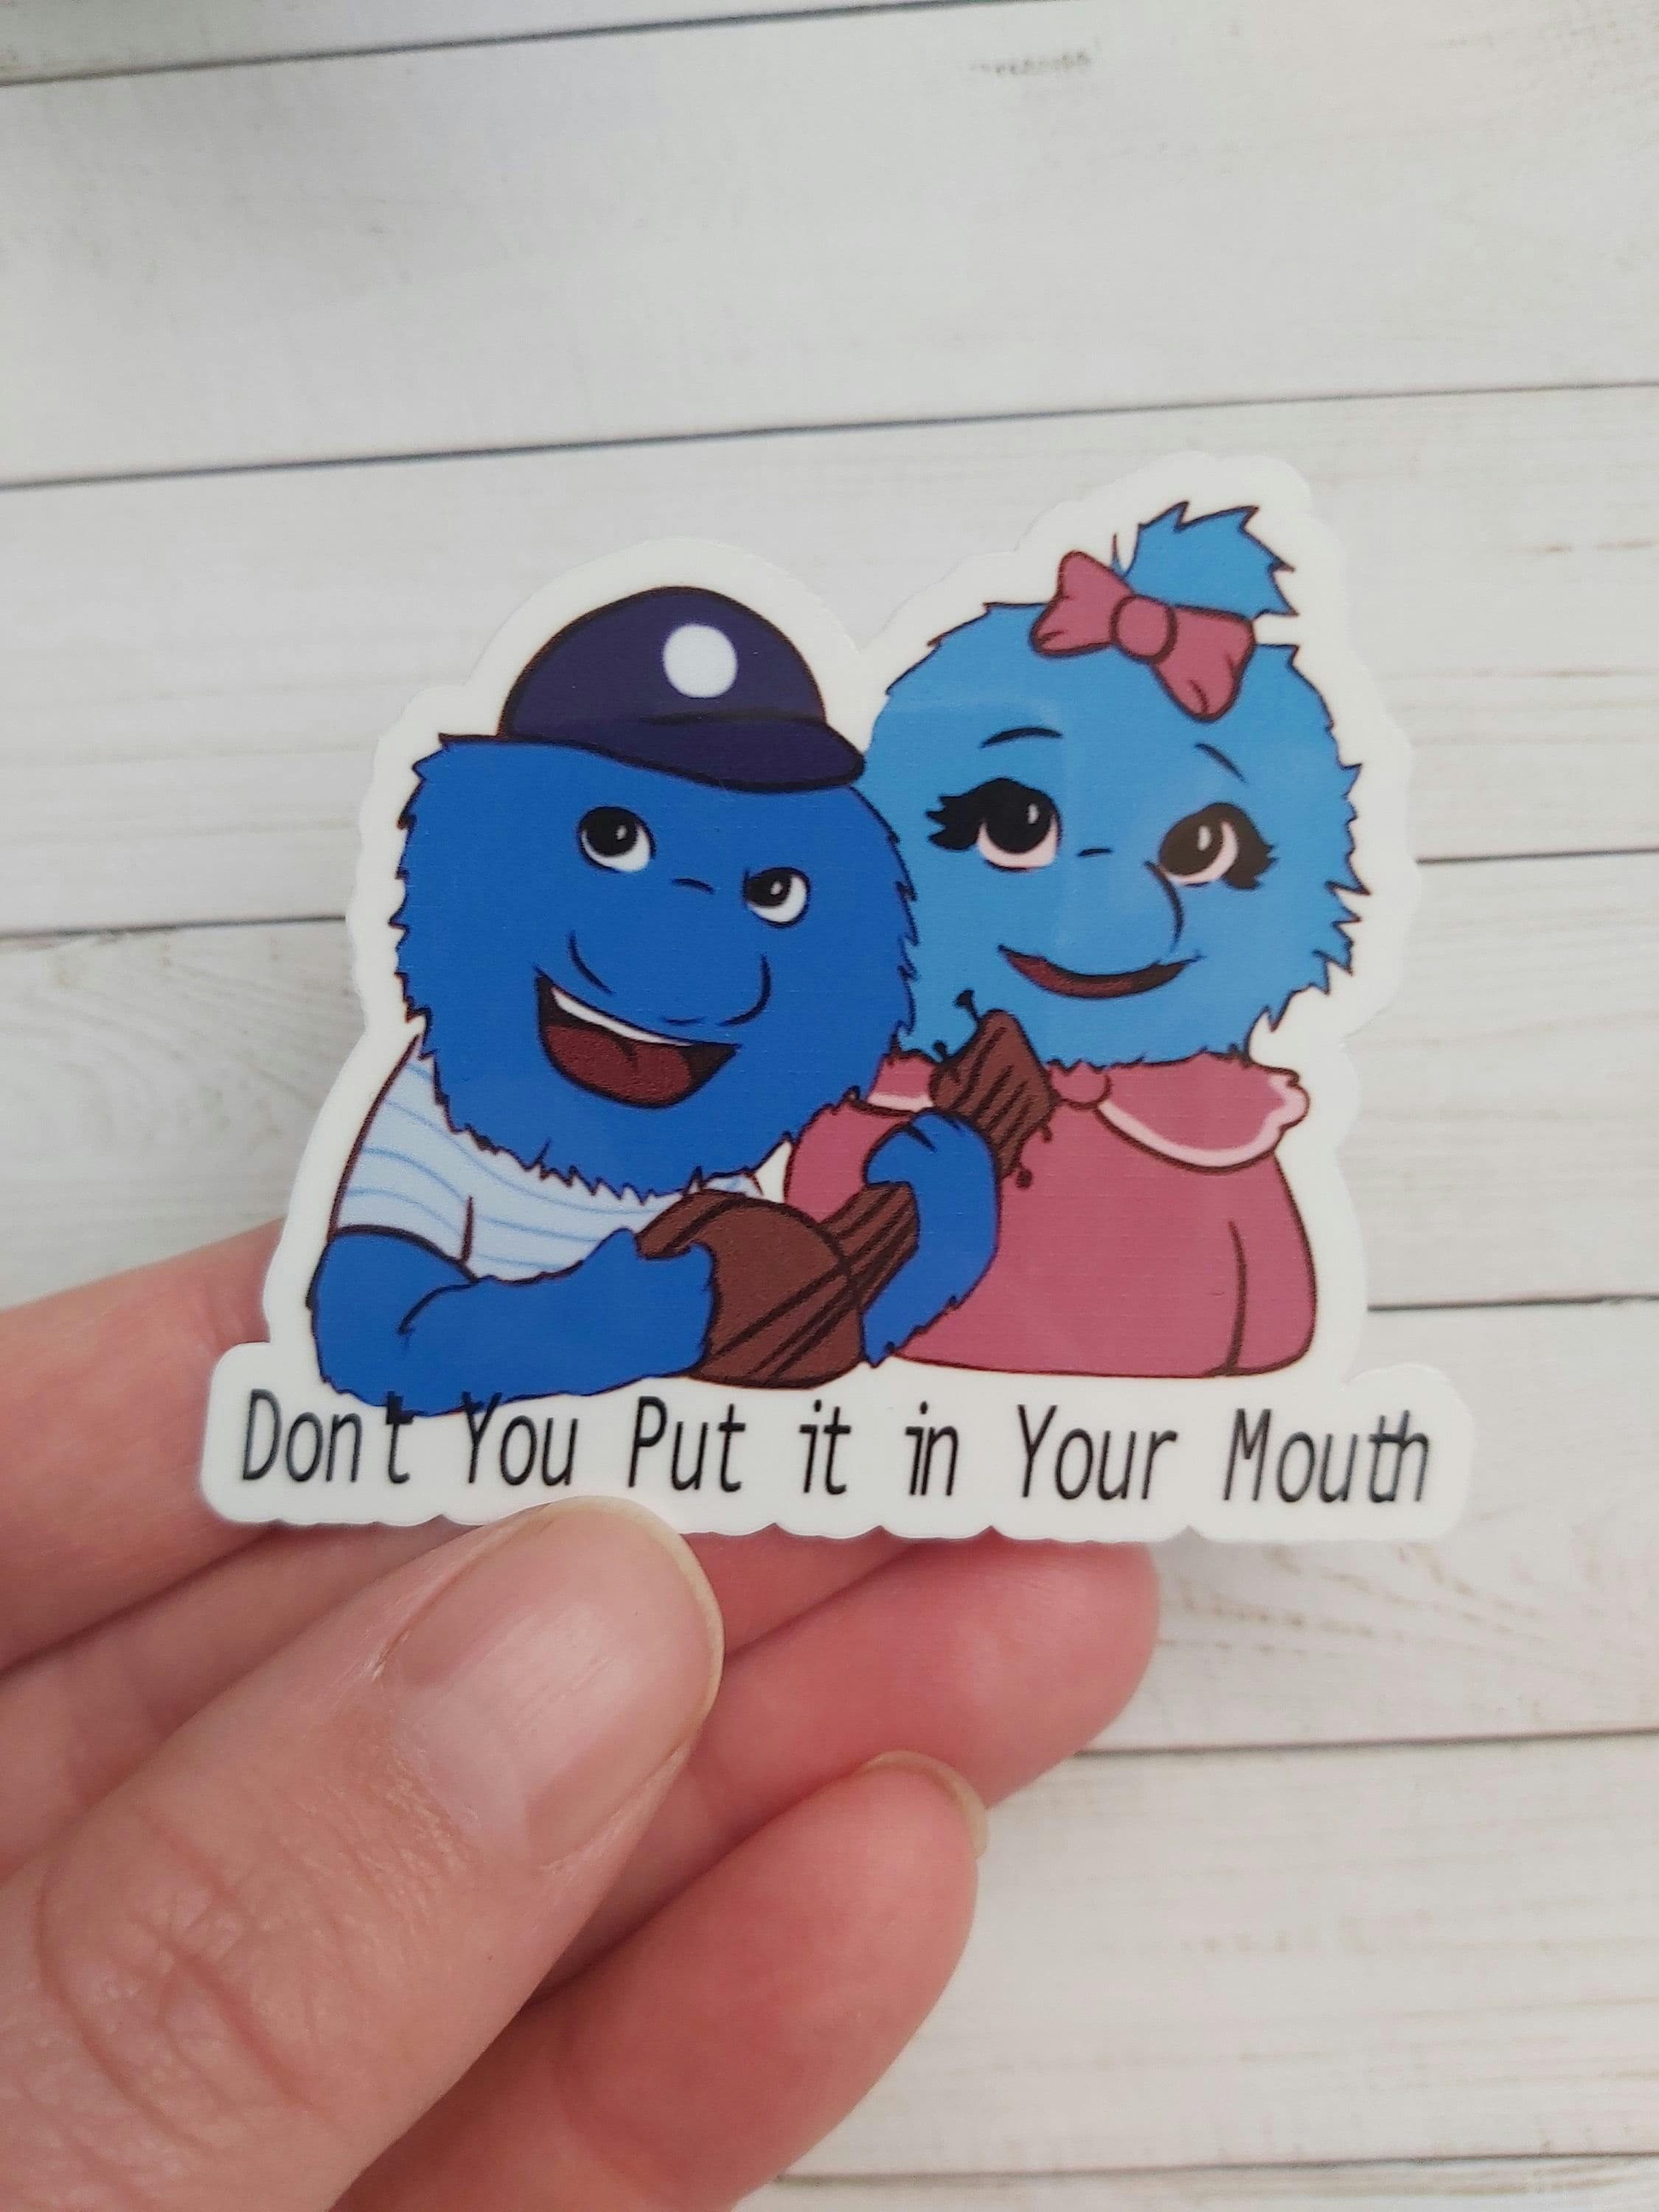 A sticker of two blue monsters